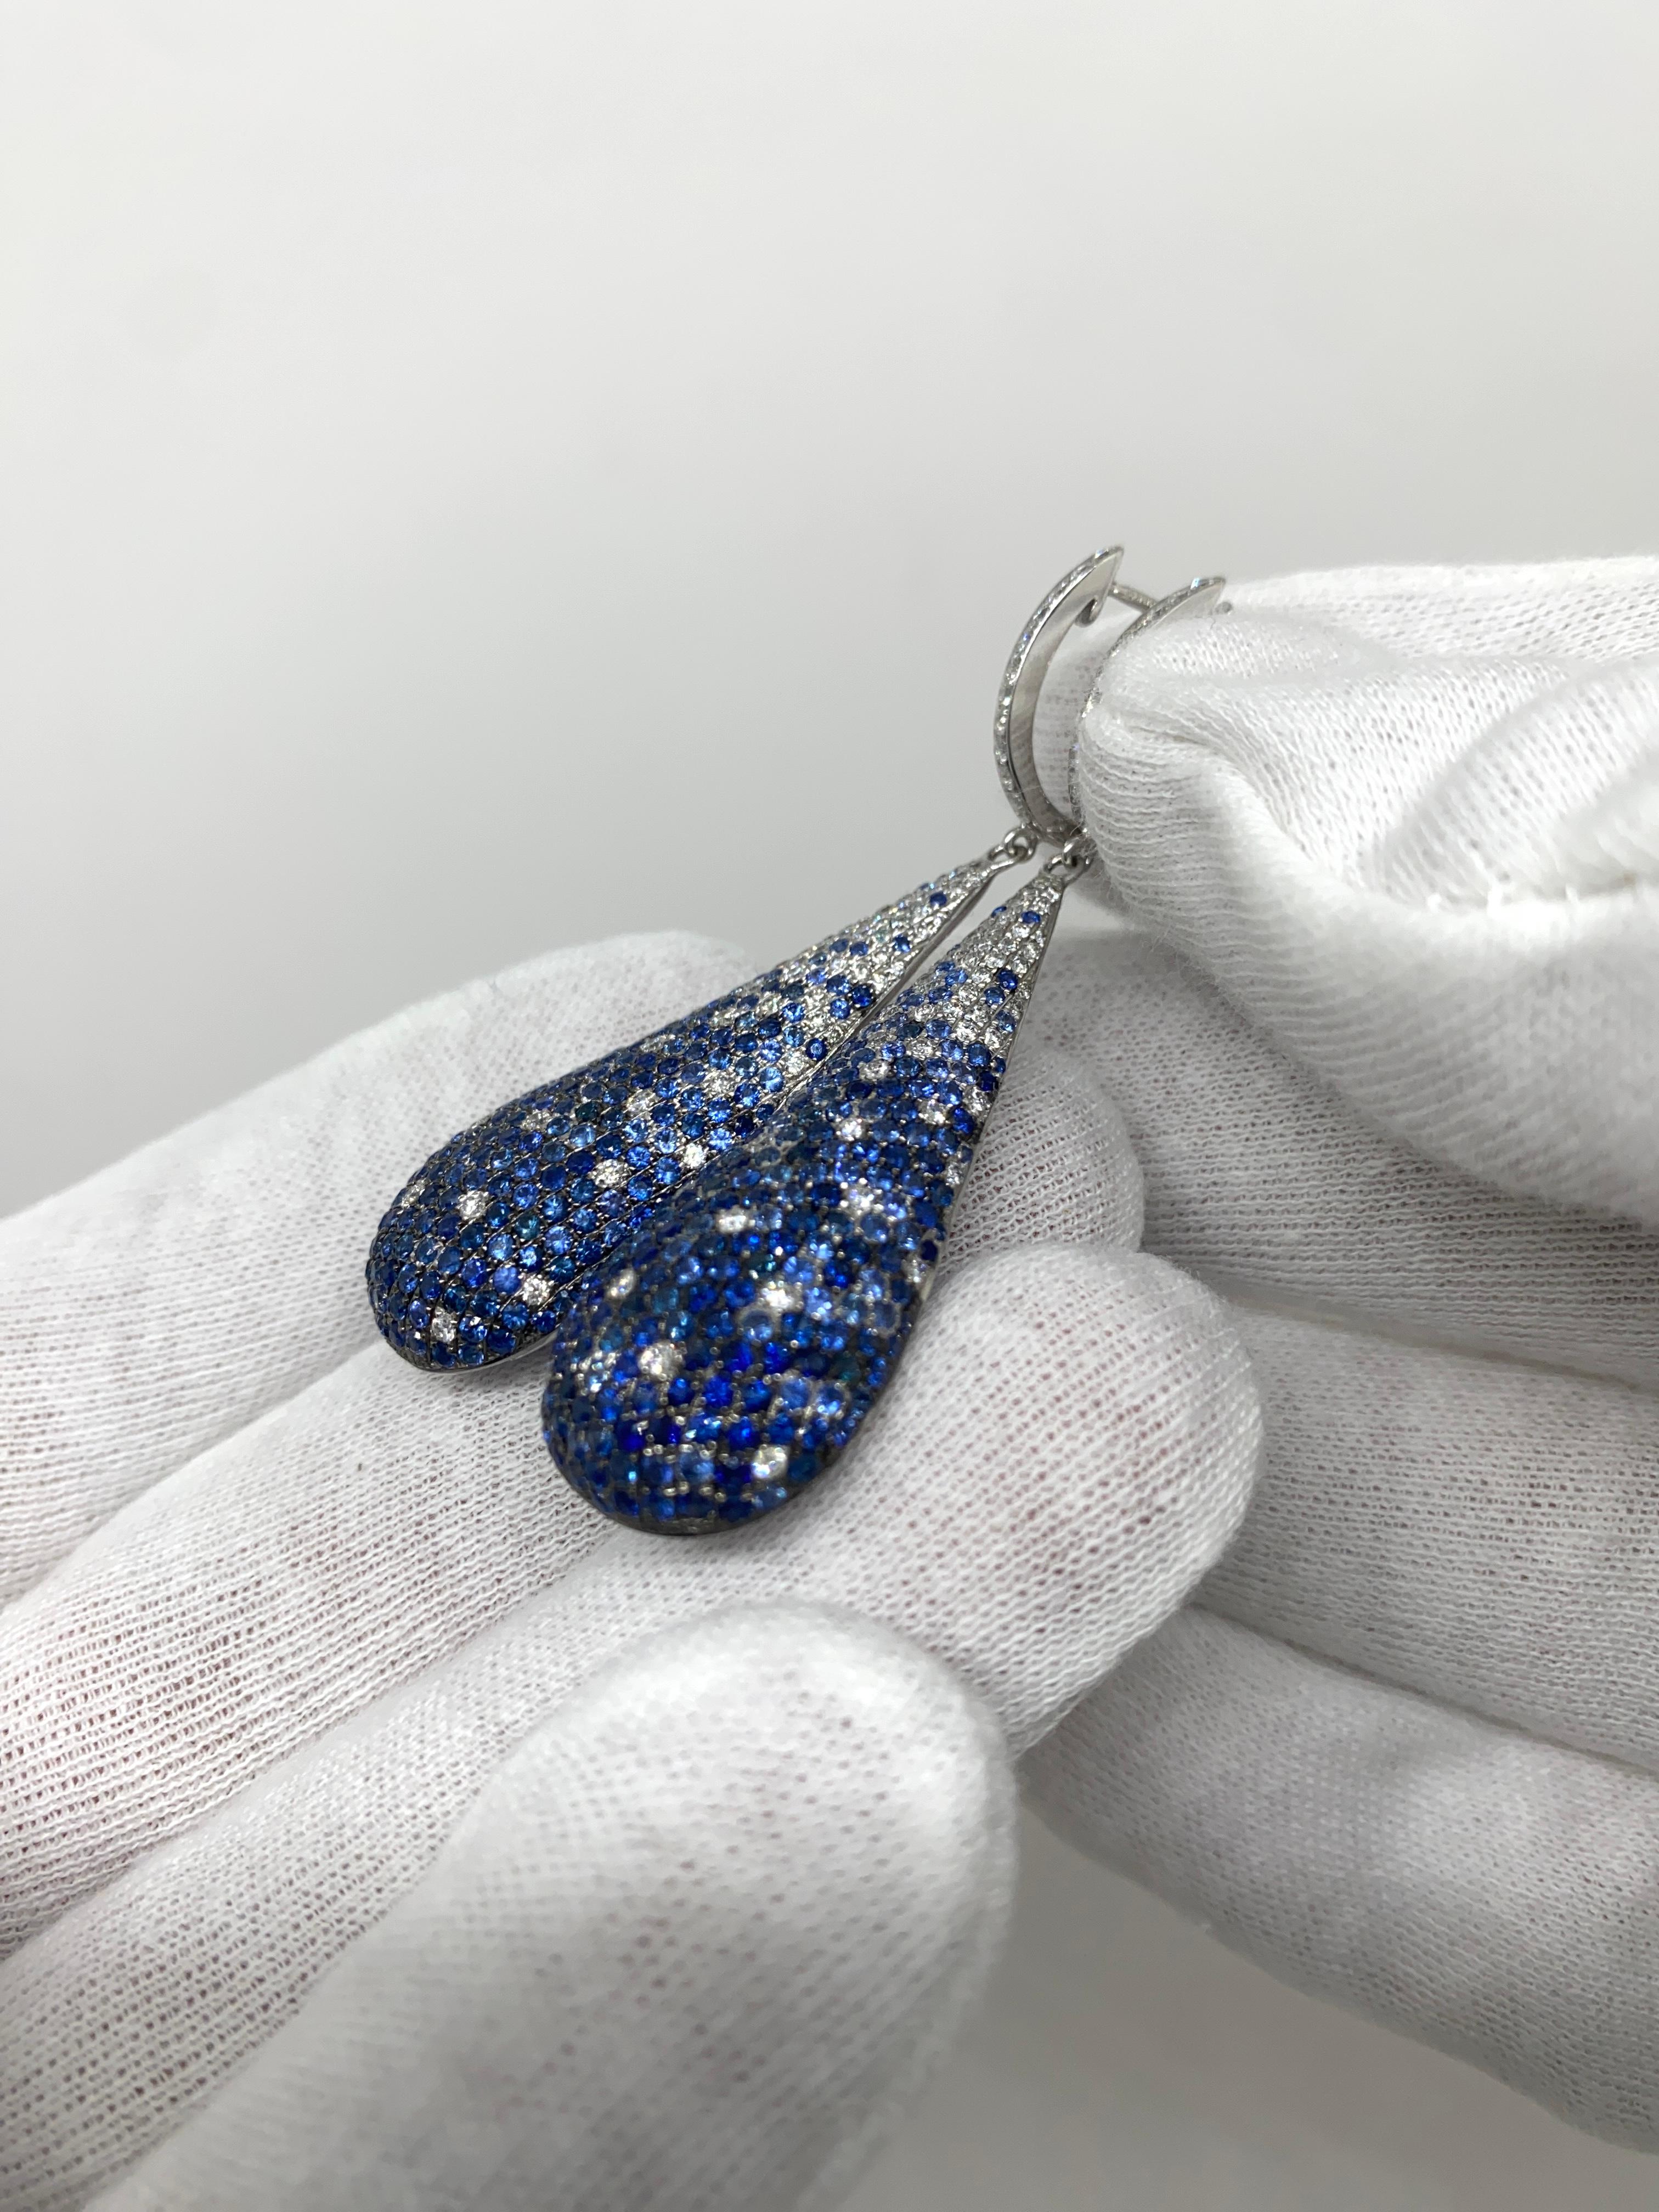 18kt White Gold Stunning Drop Earrings 5.62 Ct Blue Sapphires & 1.42 Diamonds For Sale 1